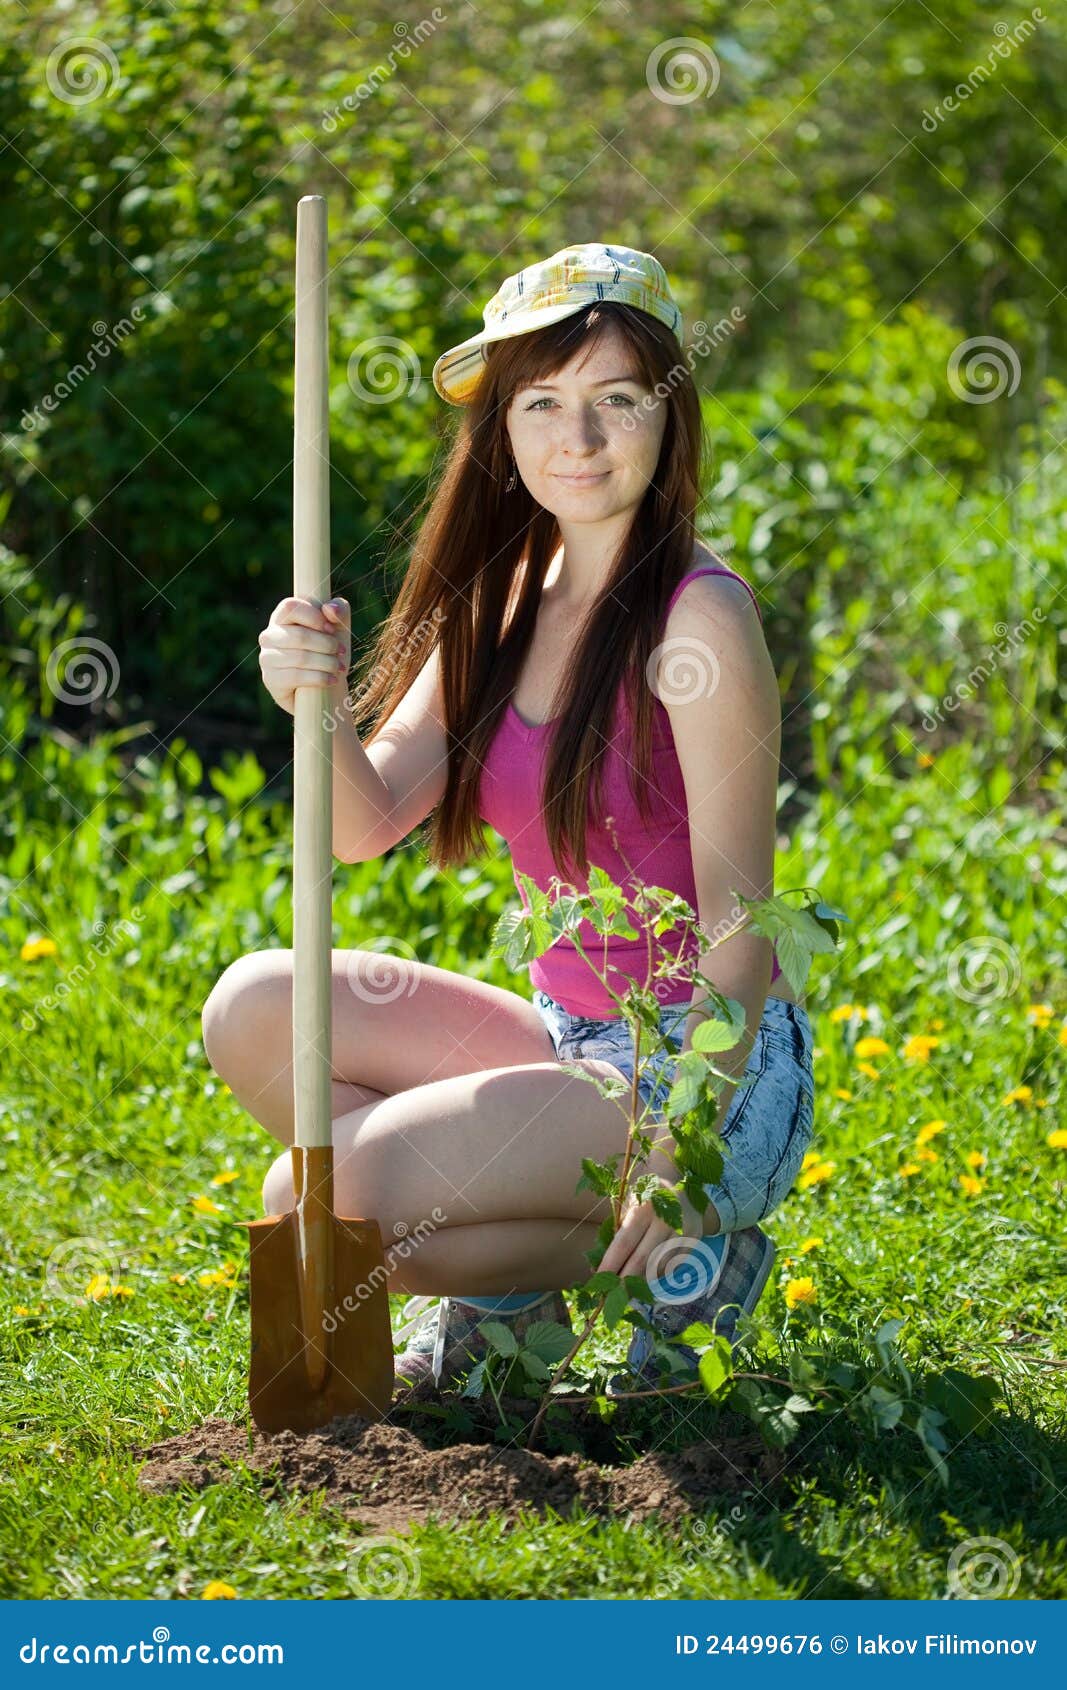 Gardening woman stock photo. Image of country, grass - 24499676